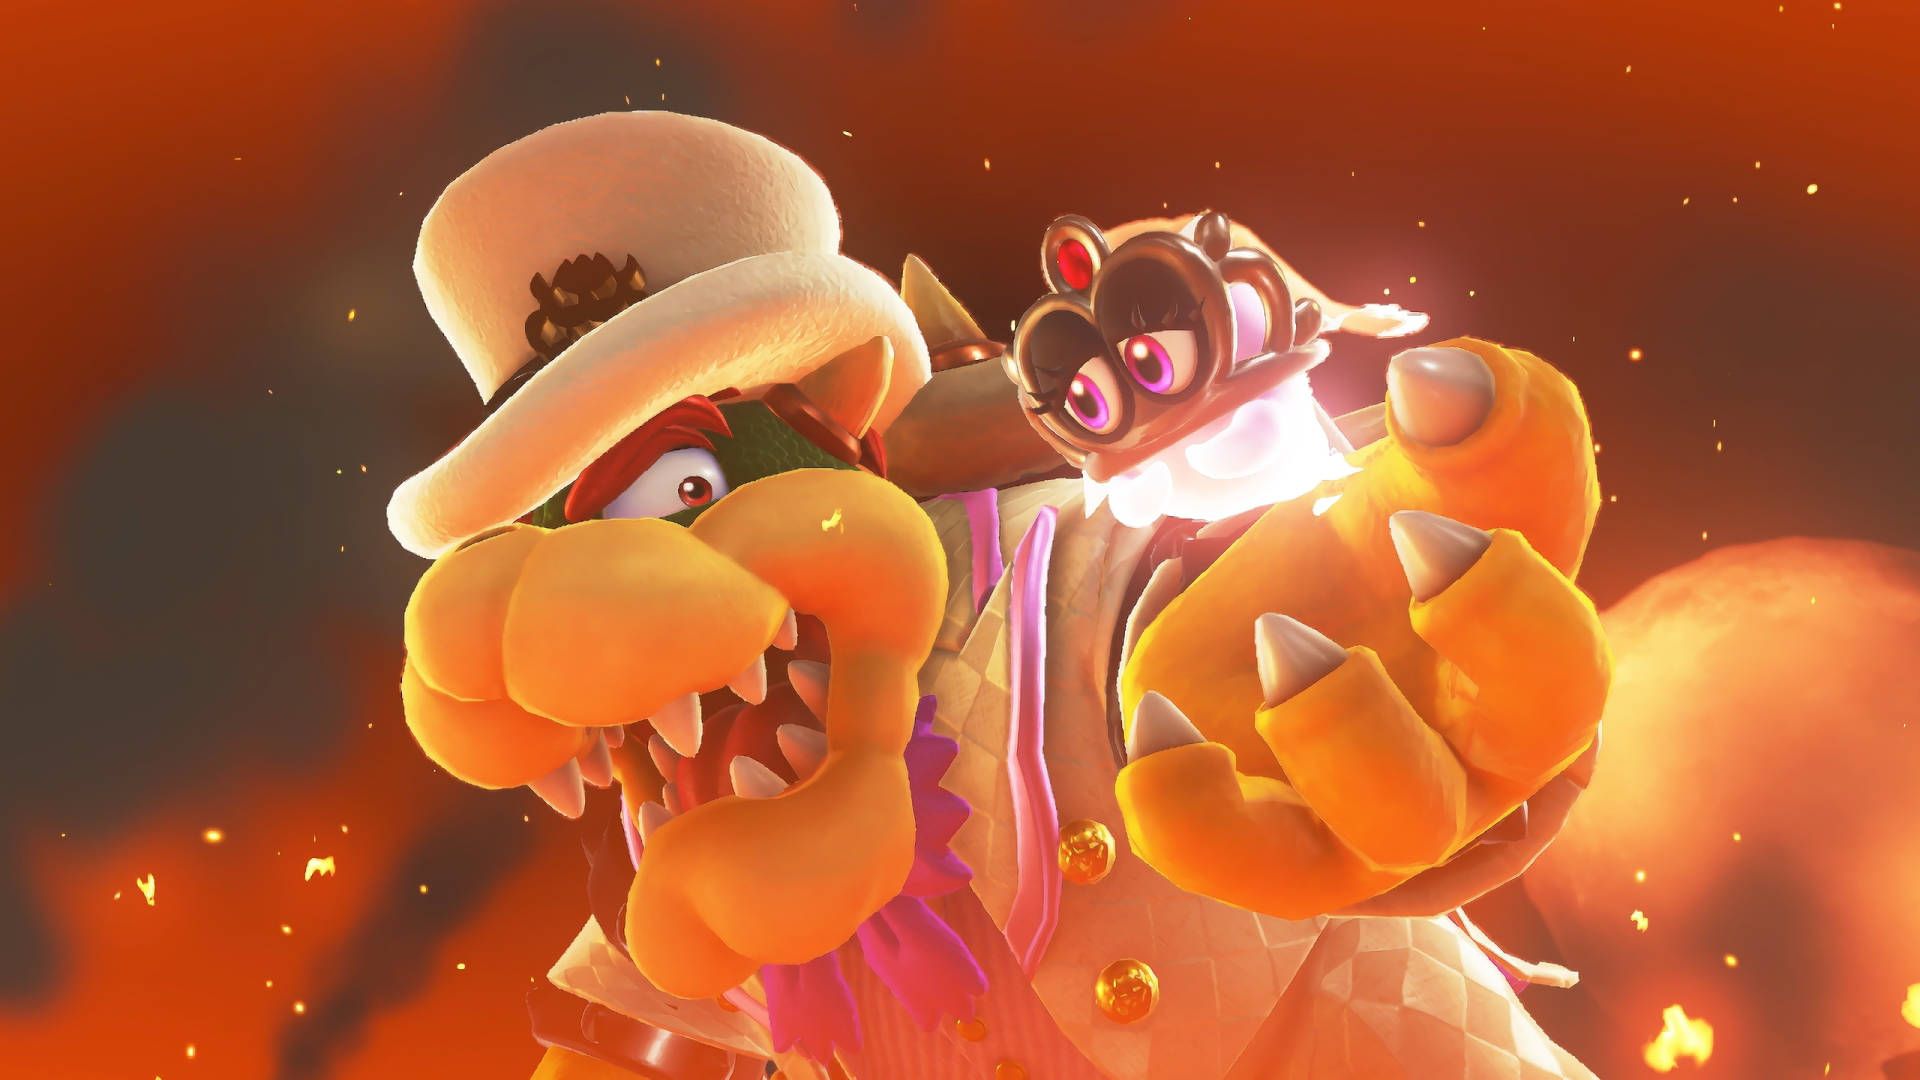 Download Super Mario Odyssey Bowser And Tiara In Flames Wallpaper